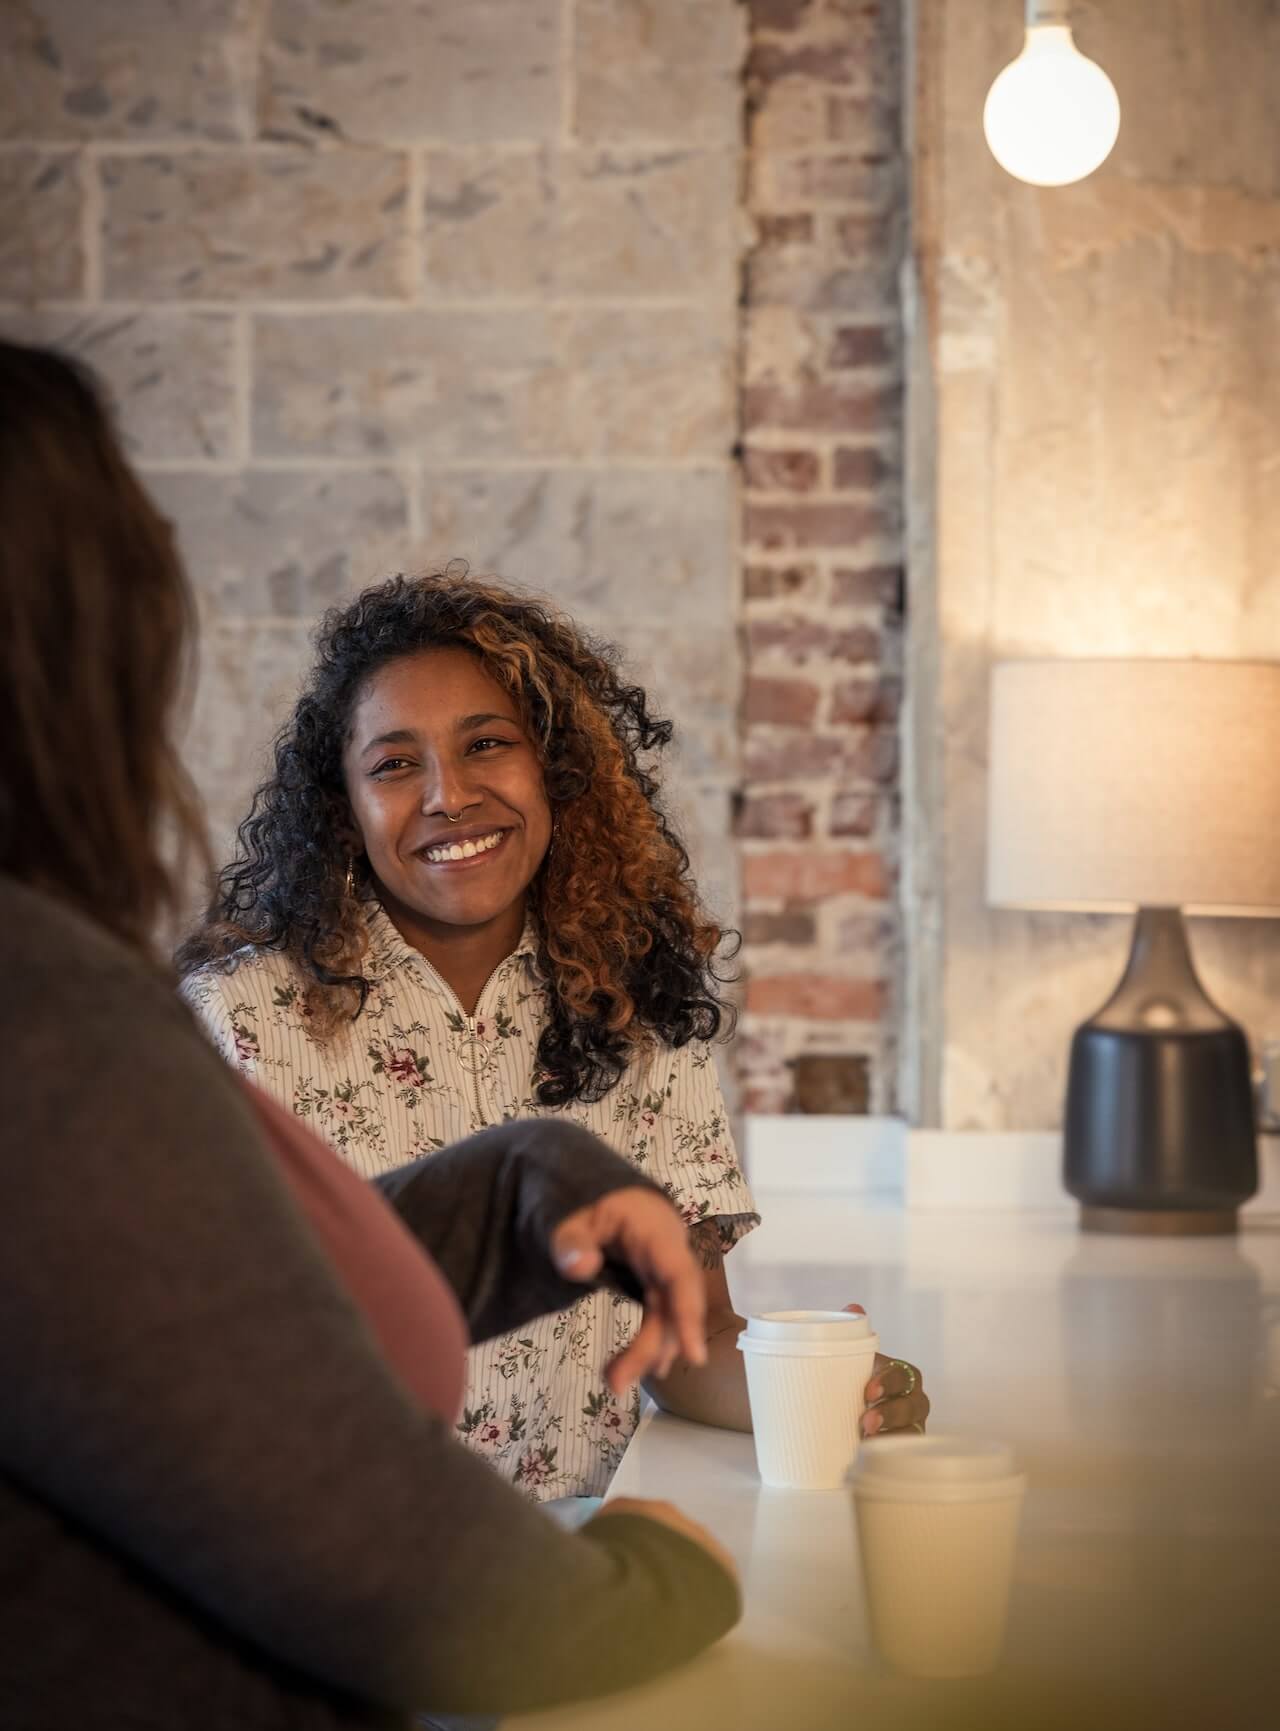 Two employees sitting at a coffee bar chatting and smiling.